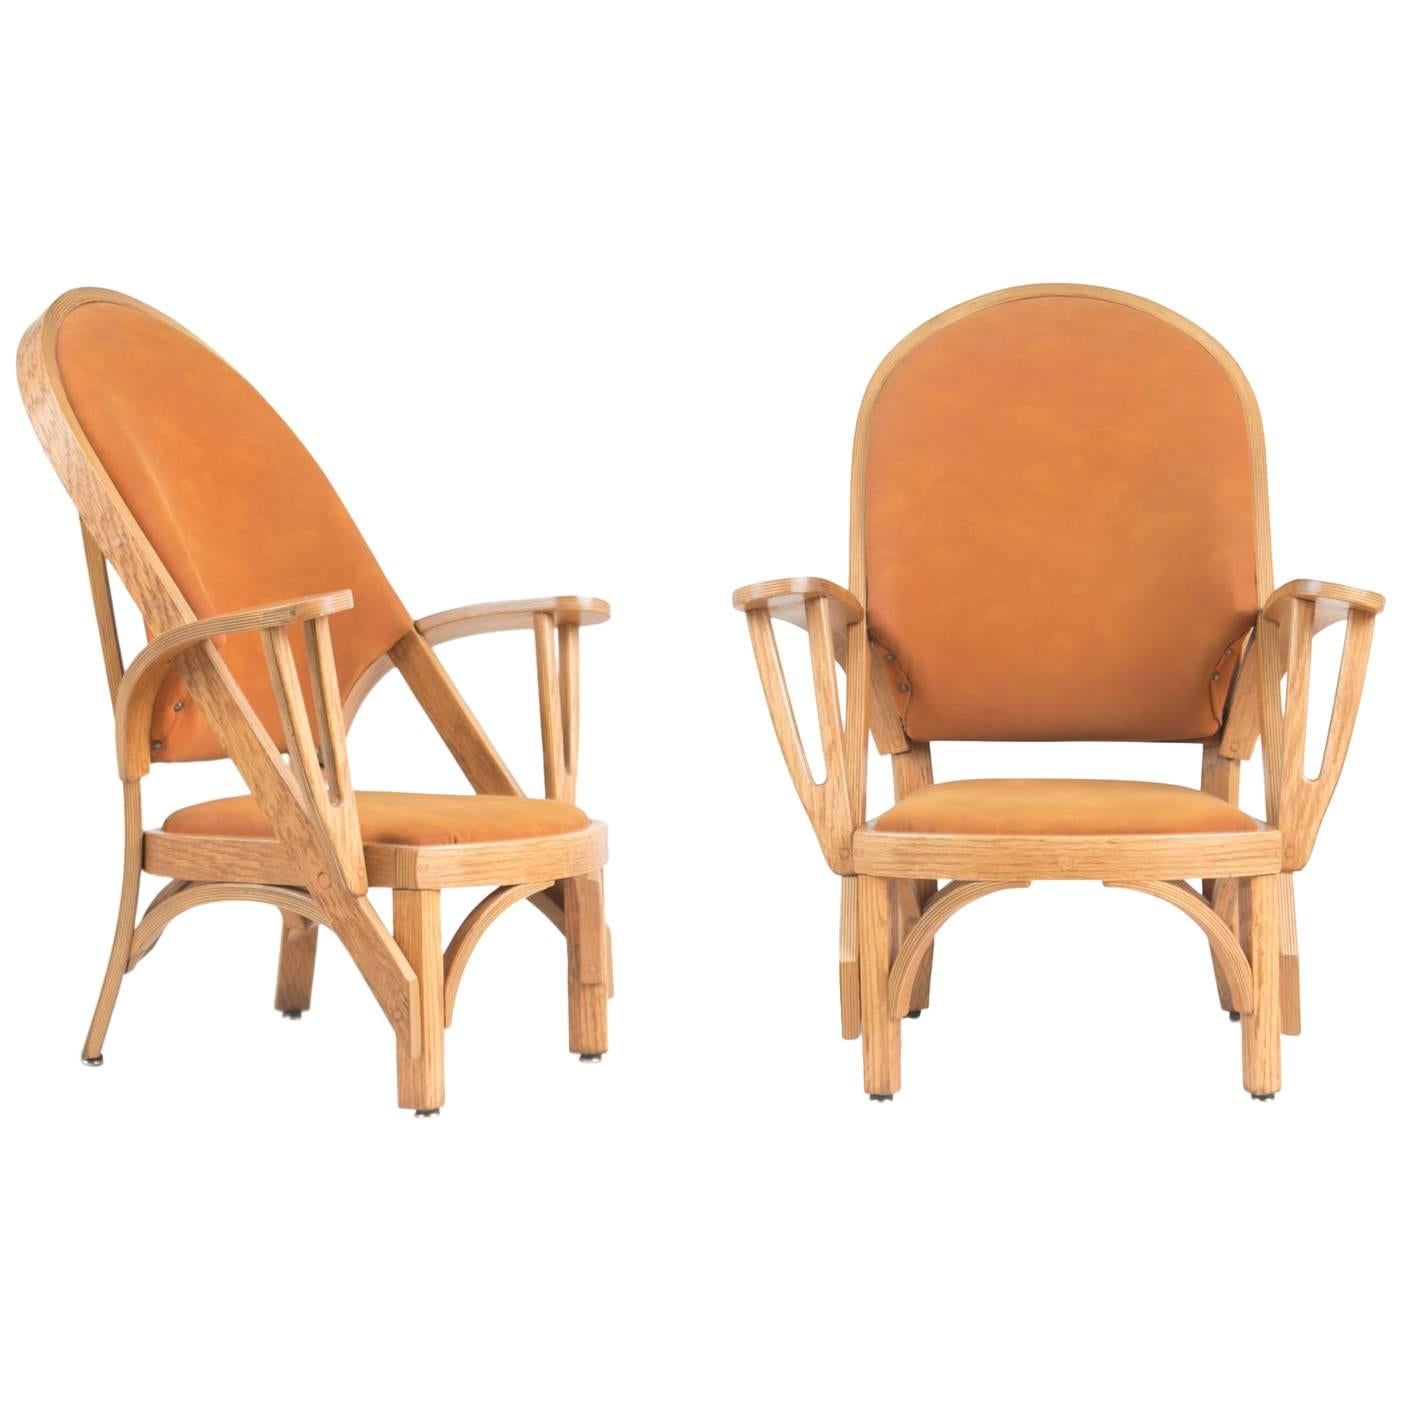 Norman Ridenour Bentwood Low Armchairs, Signed and Dated, 1978